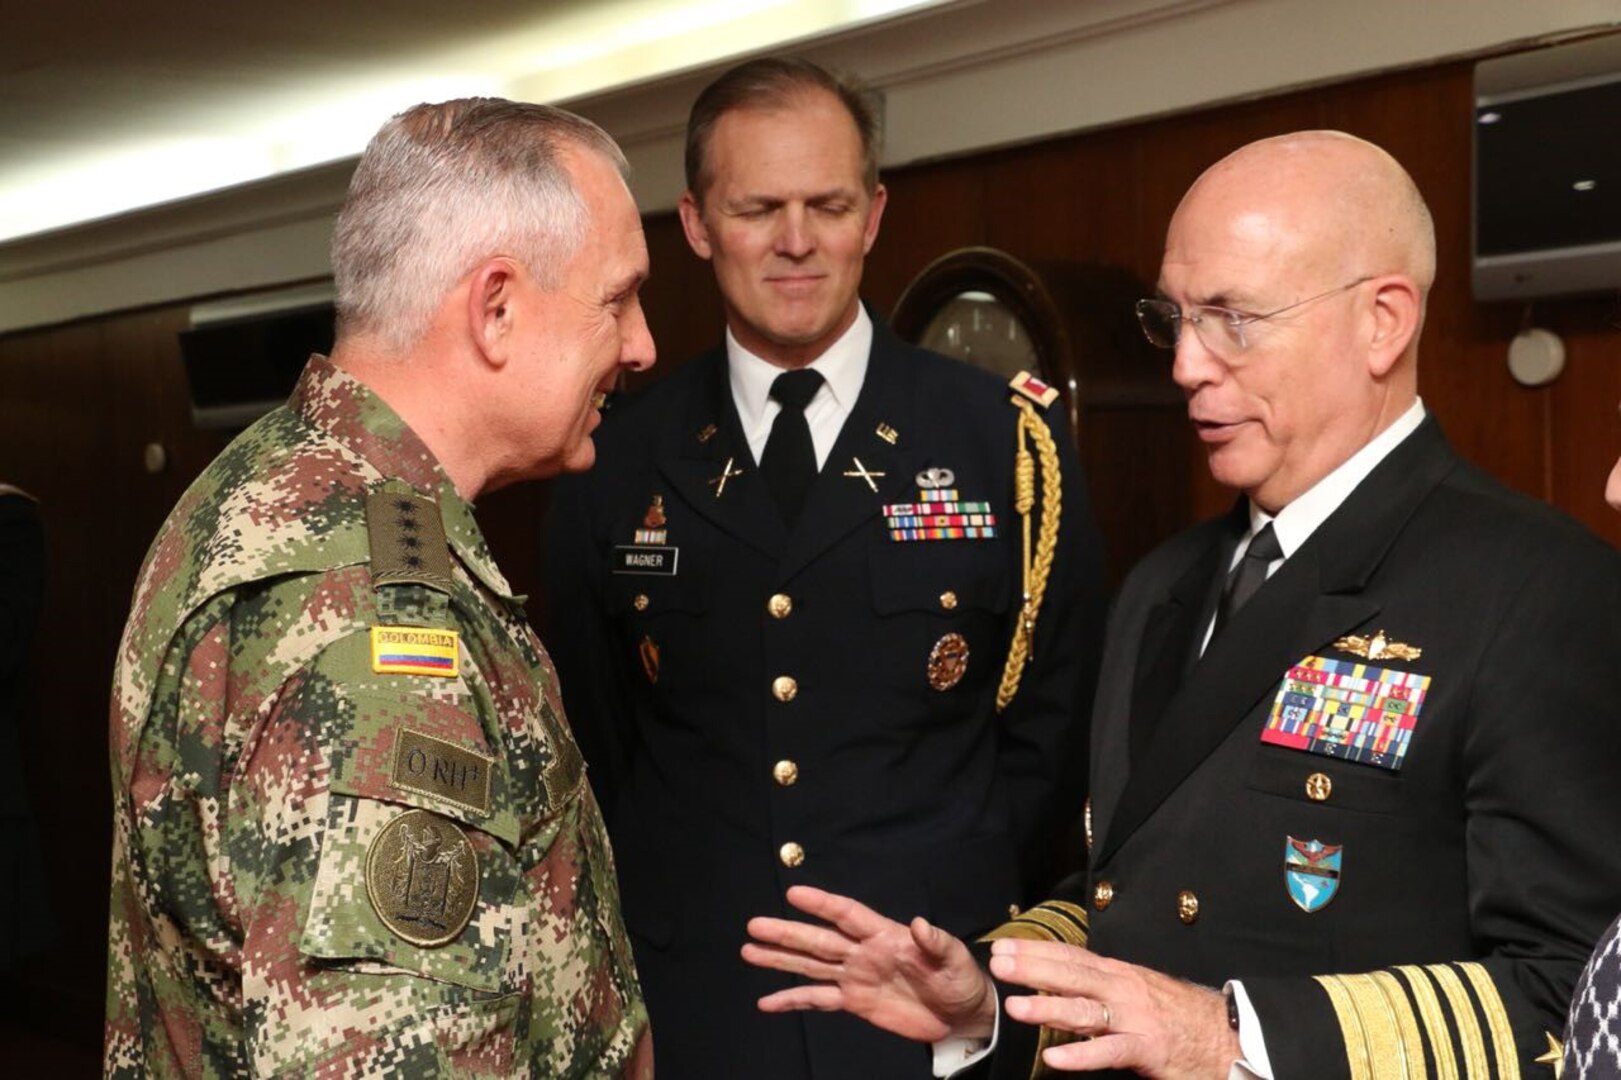 Military officers speak to one another.